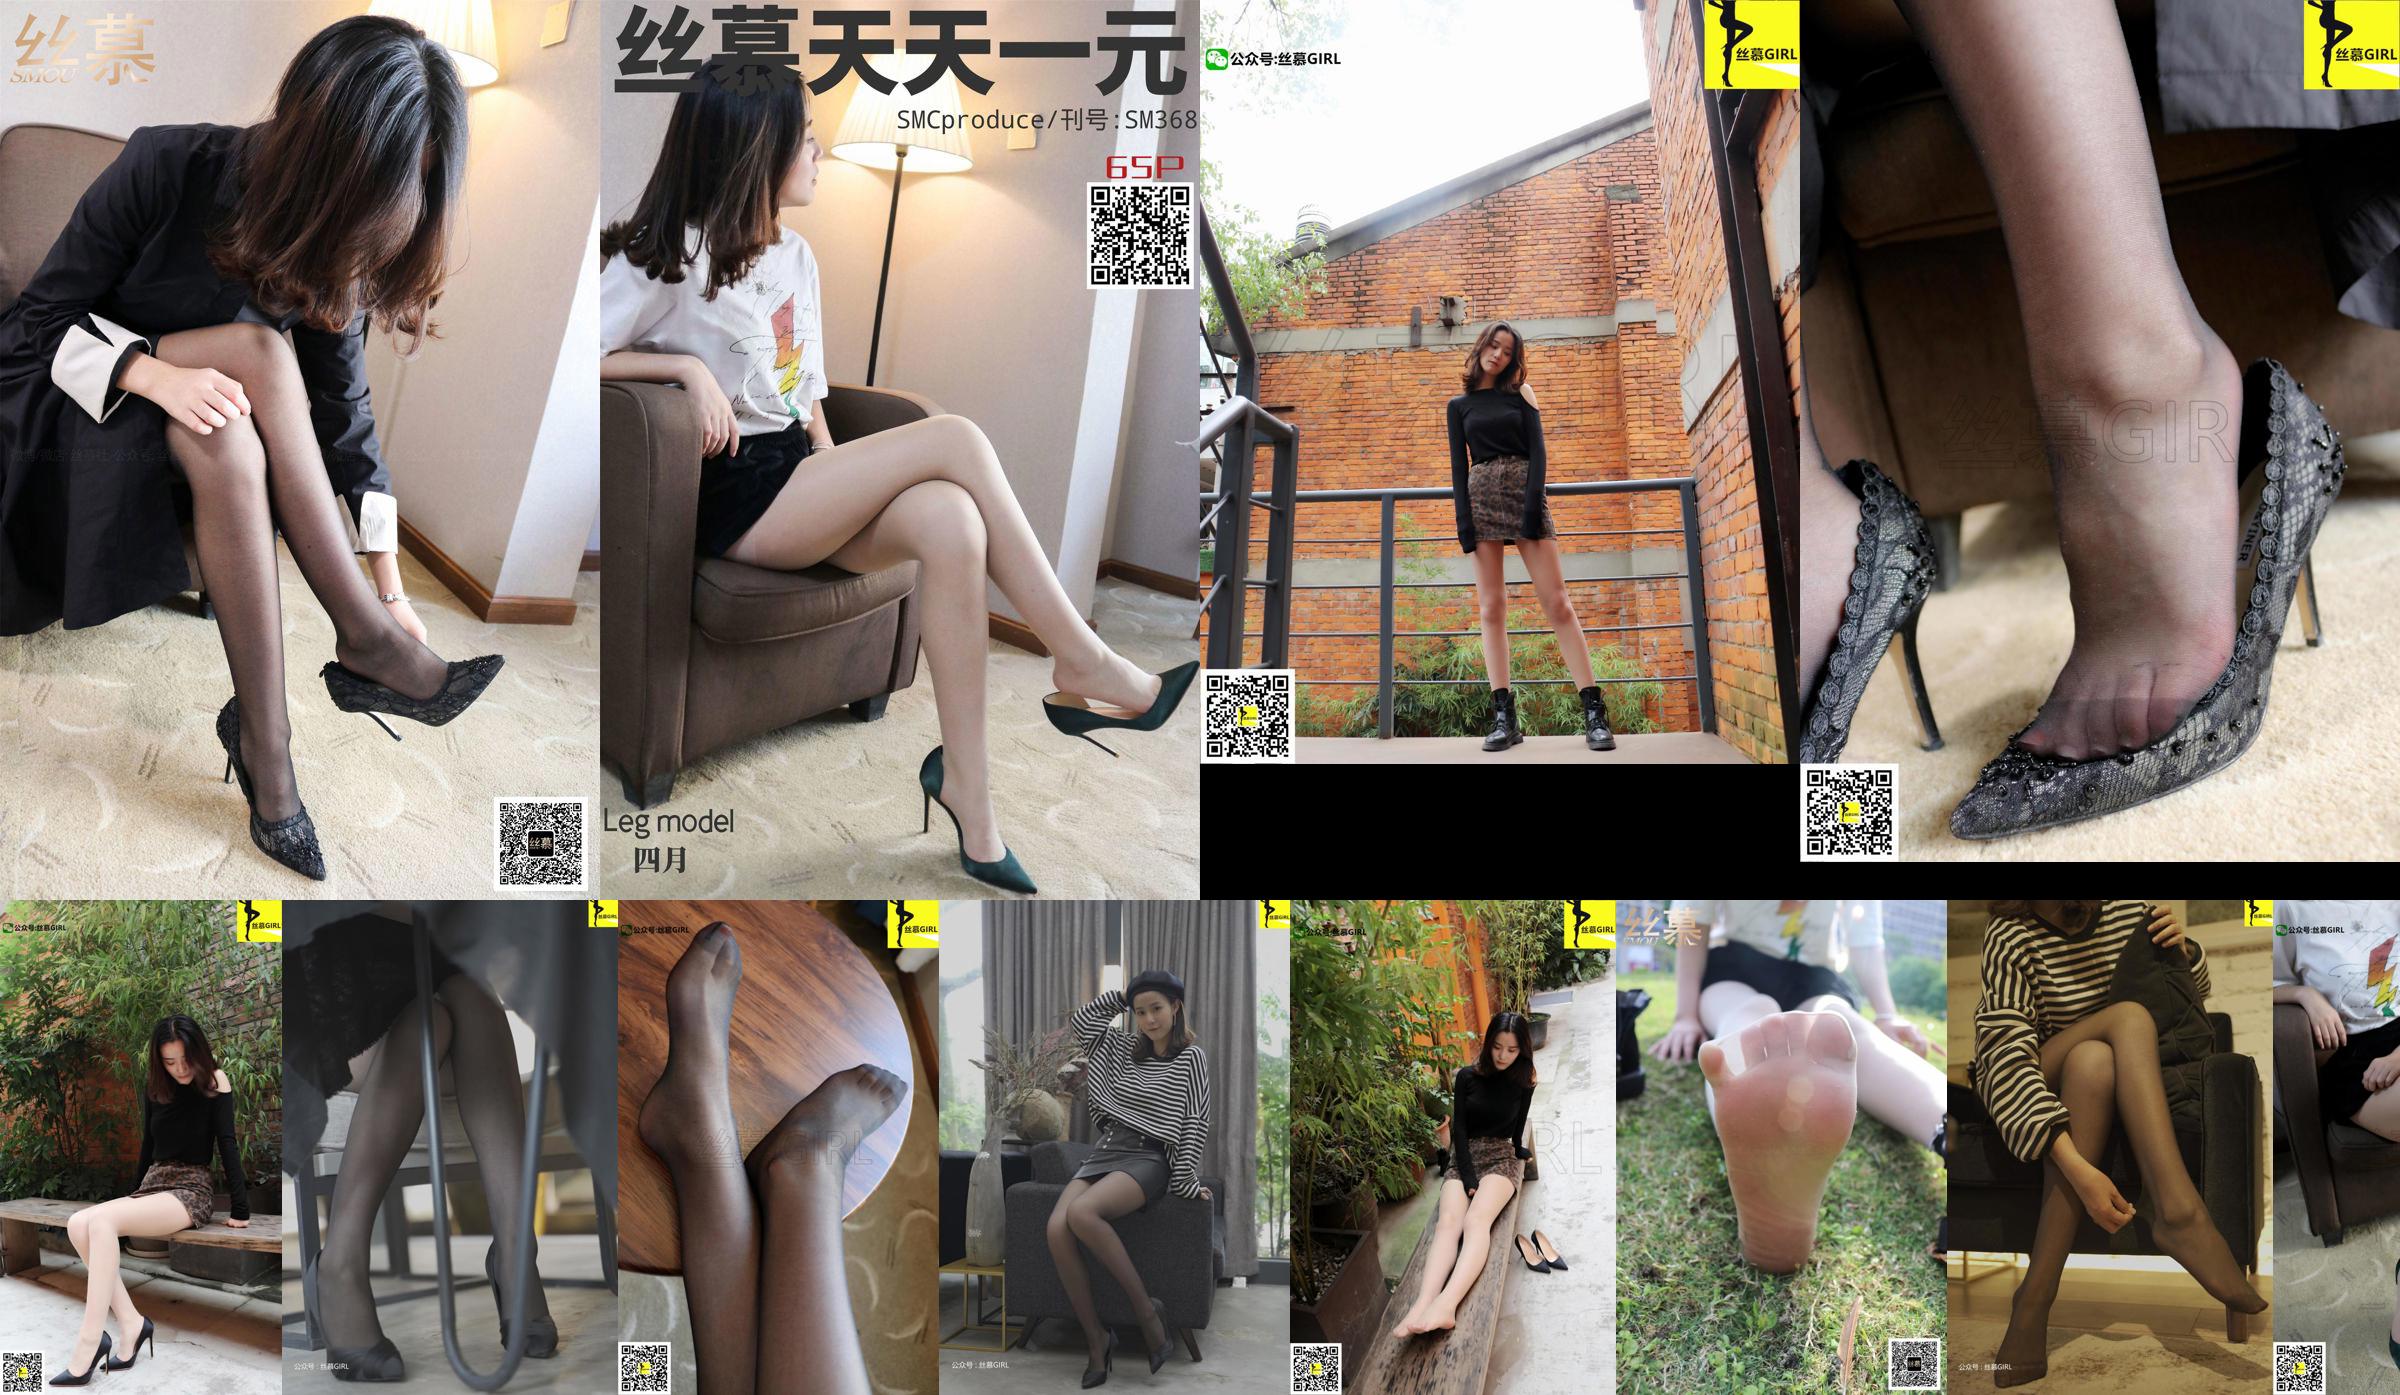 [Simu] SM368 Every Day One Yuan April "Double Silk Review" No.24f89a Seite 2